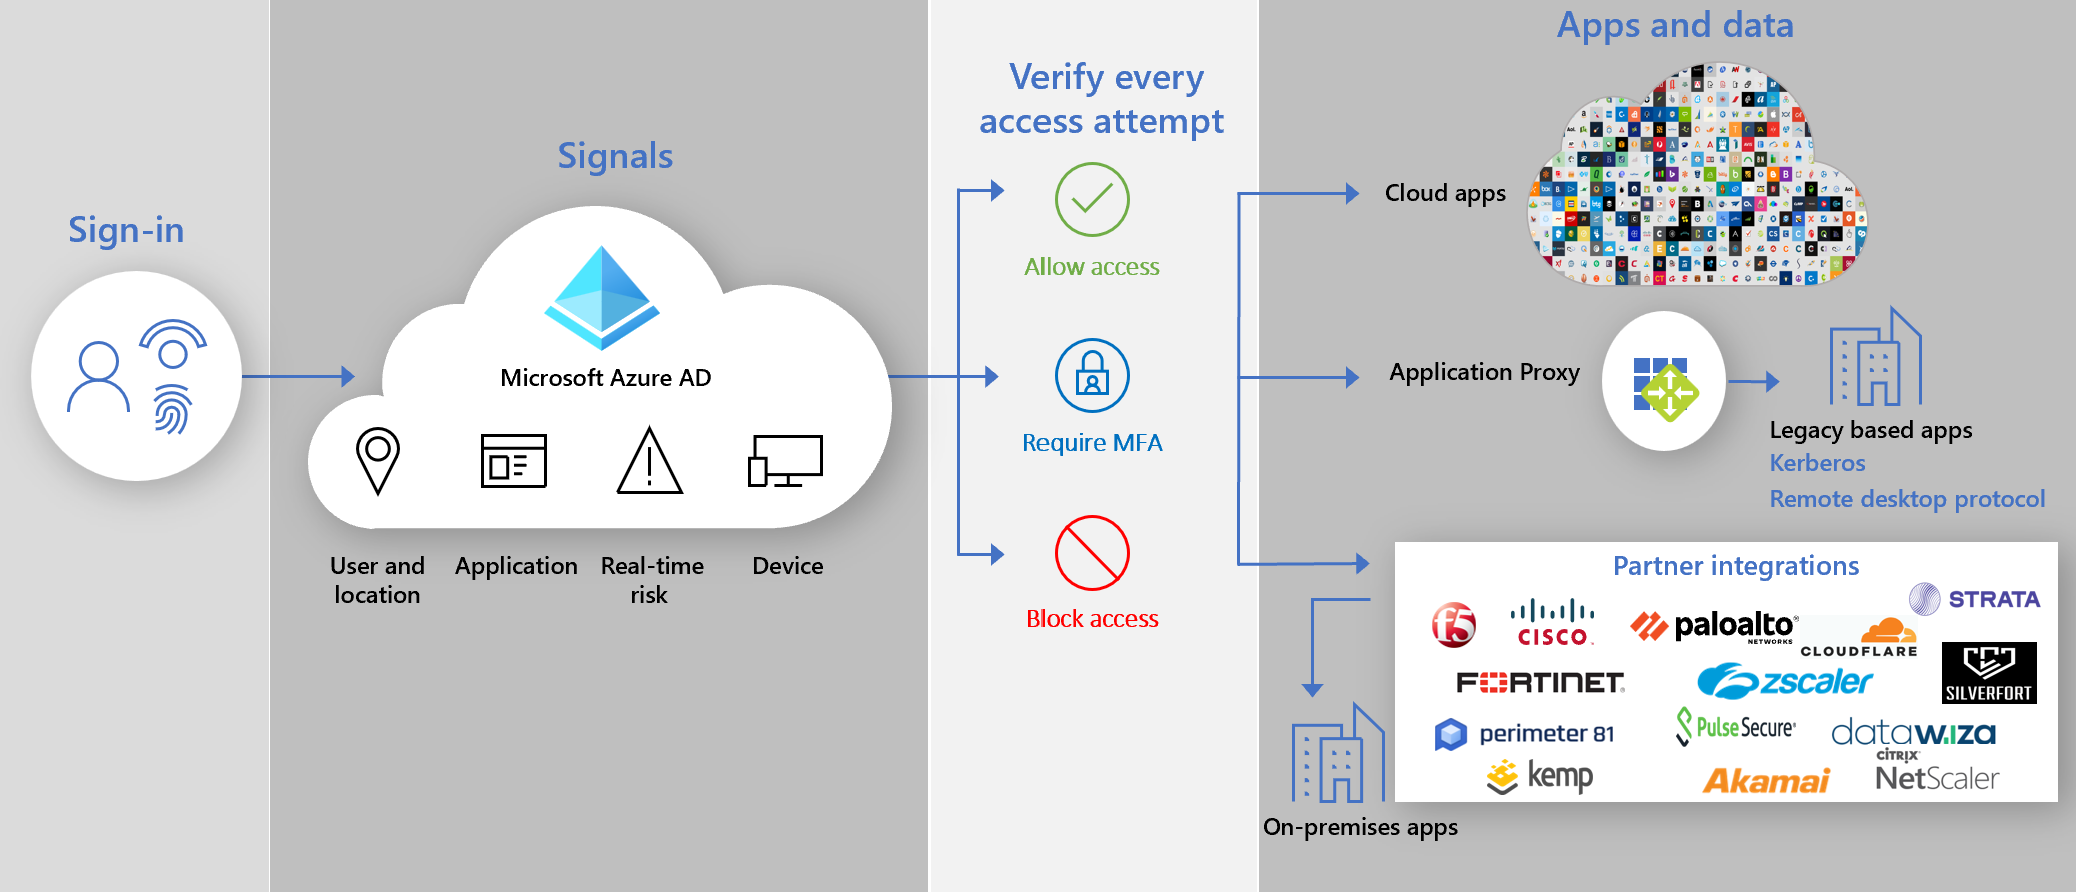 Illustration of Secure Hybrid Access partner integrations and Application Proxy providing access to legacy and on-premises applications after authentication with Azure AD.